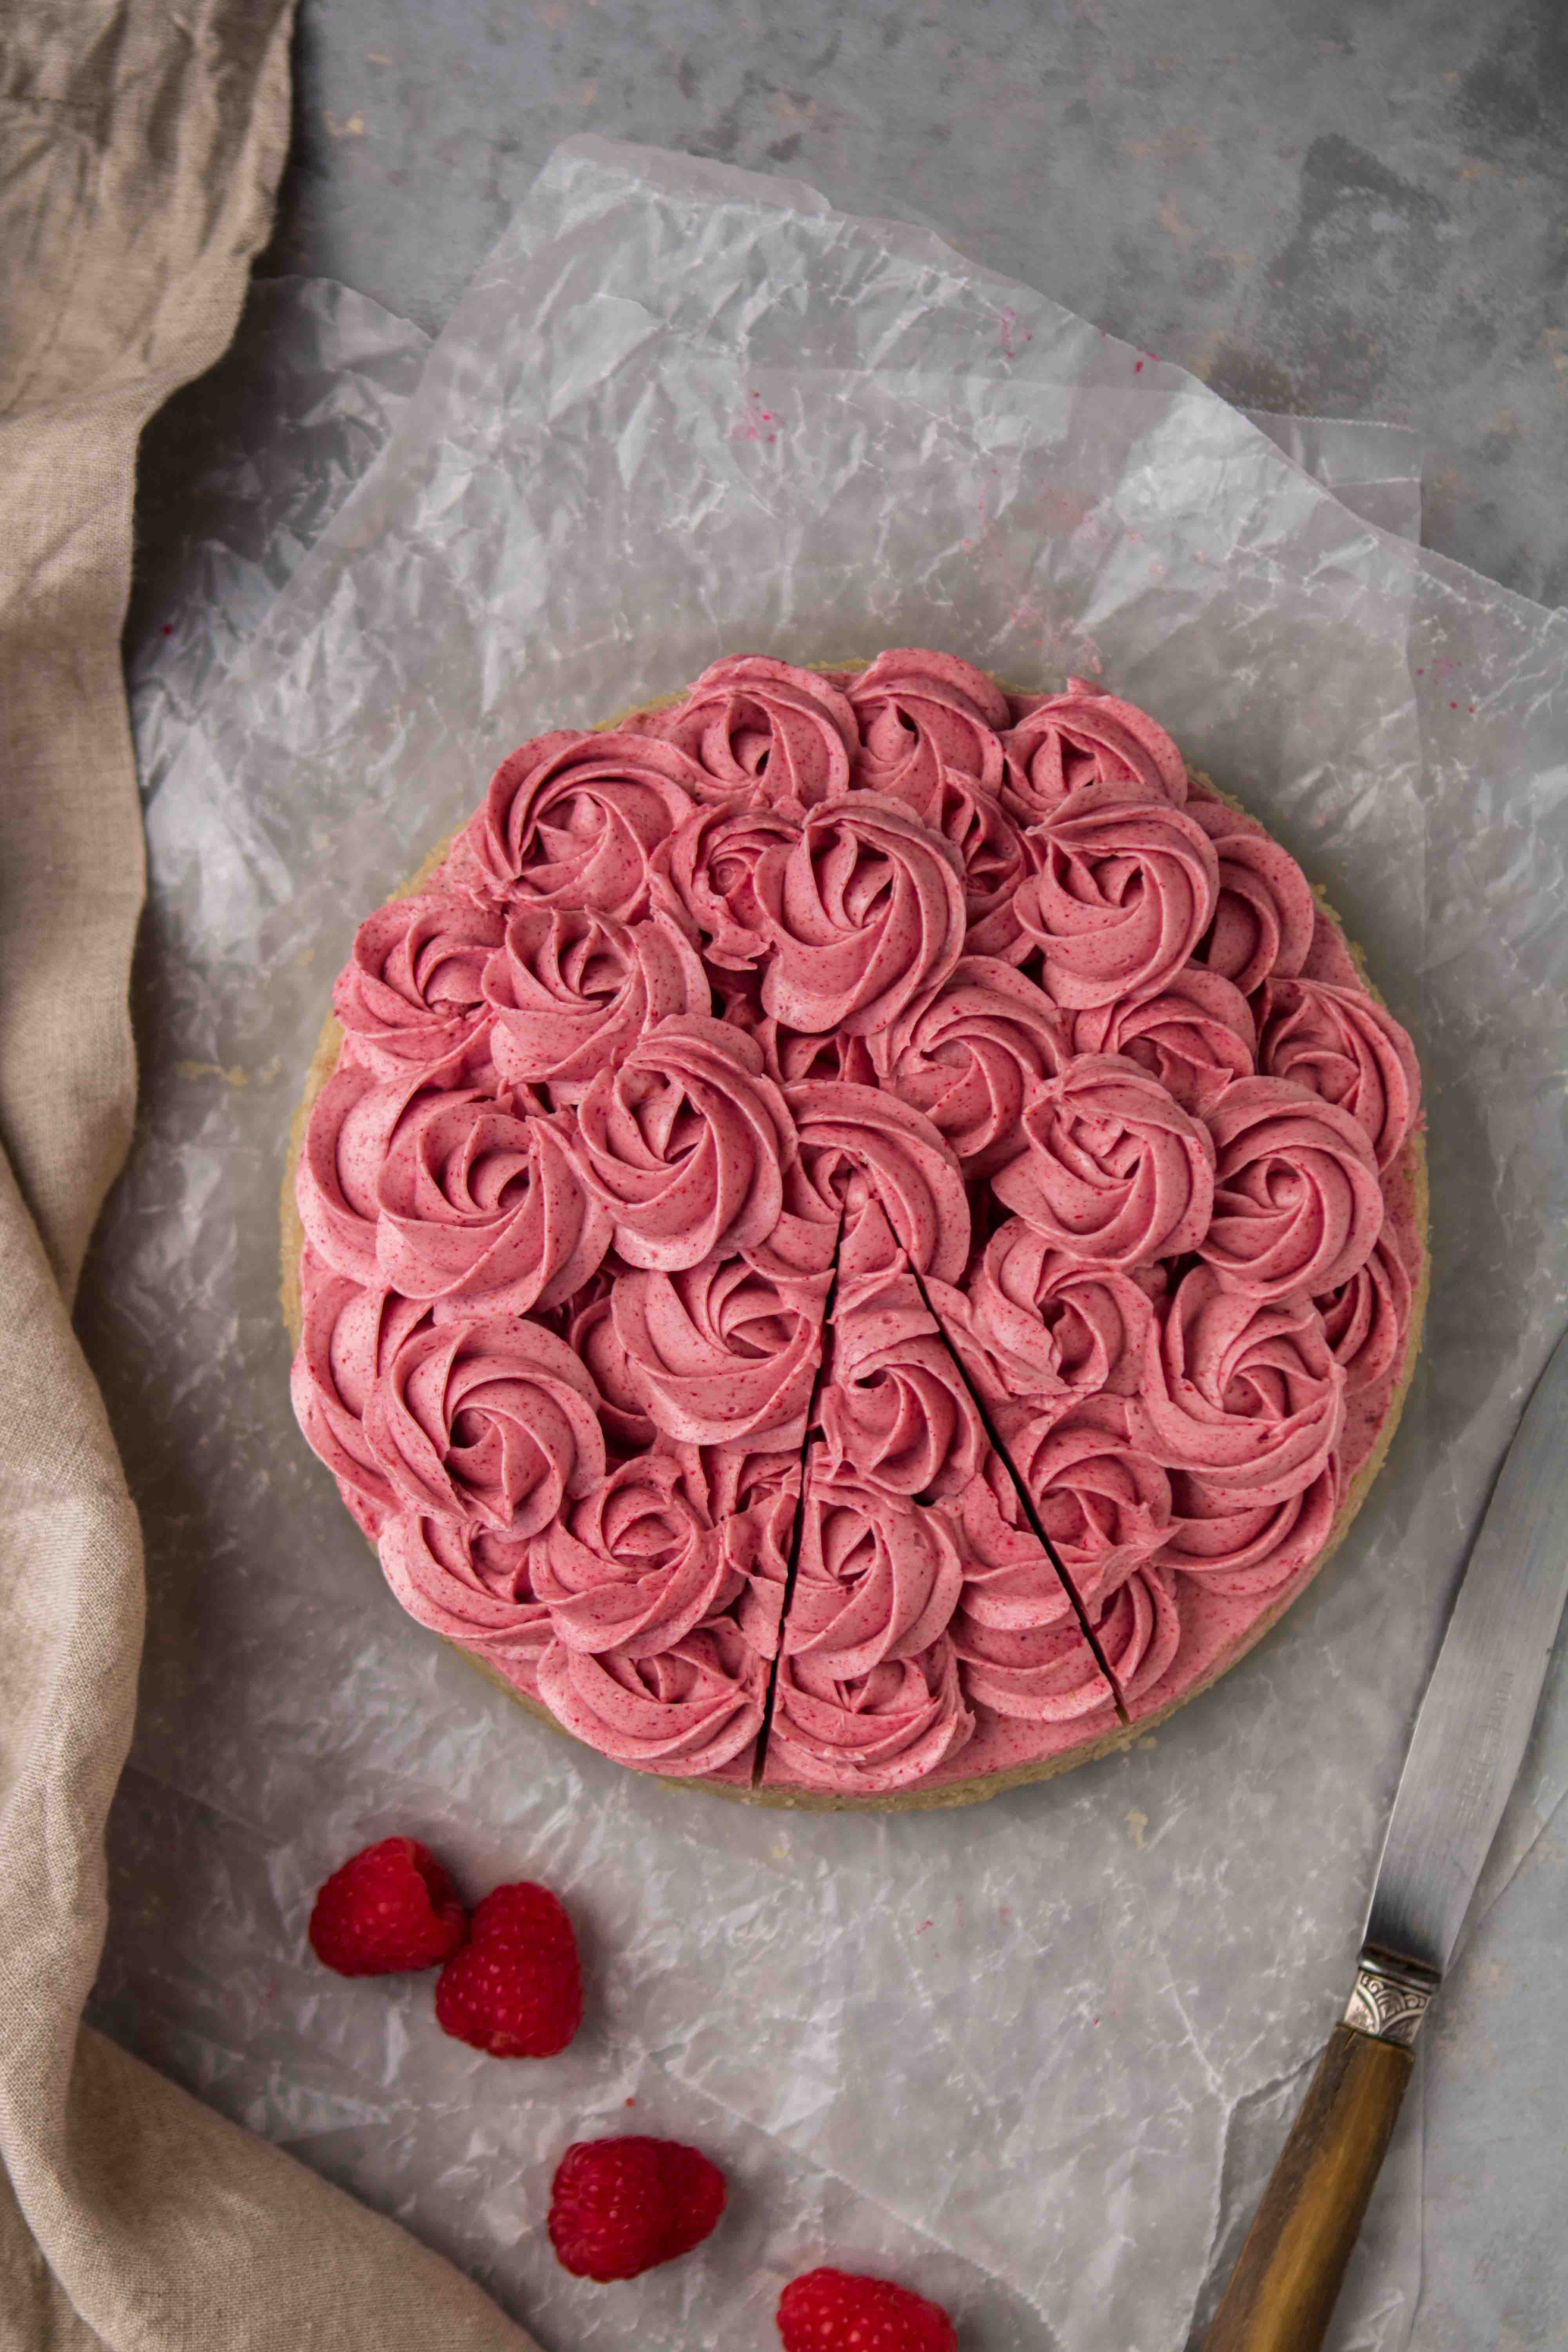 Delicious pink raspberry frosting on butter cake